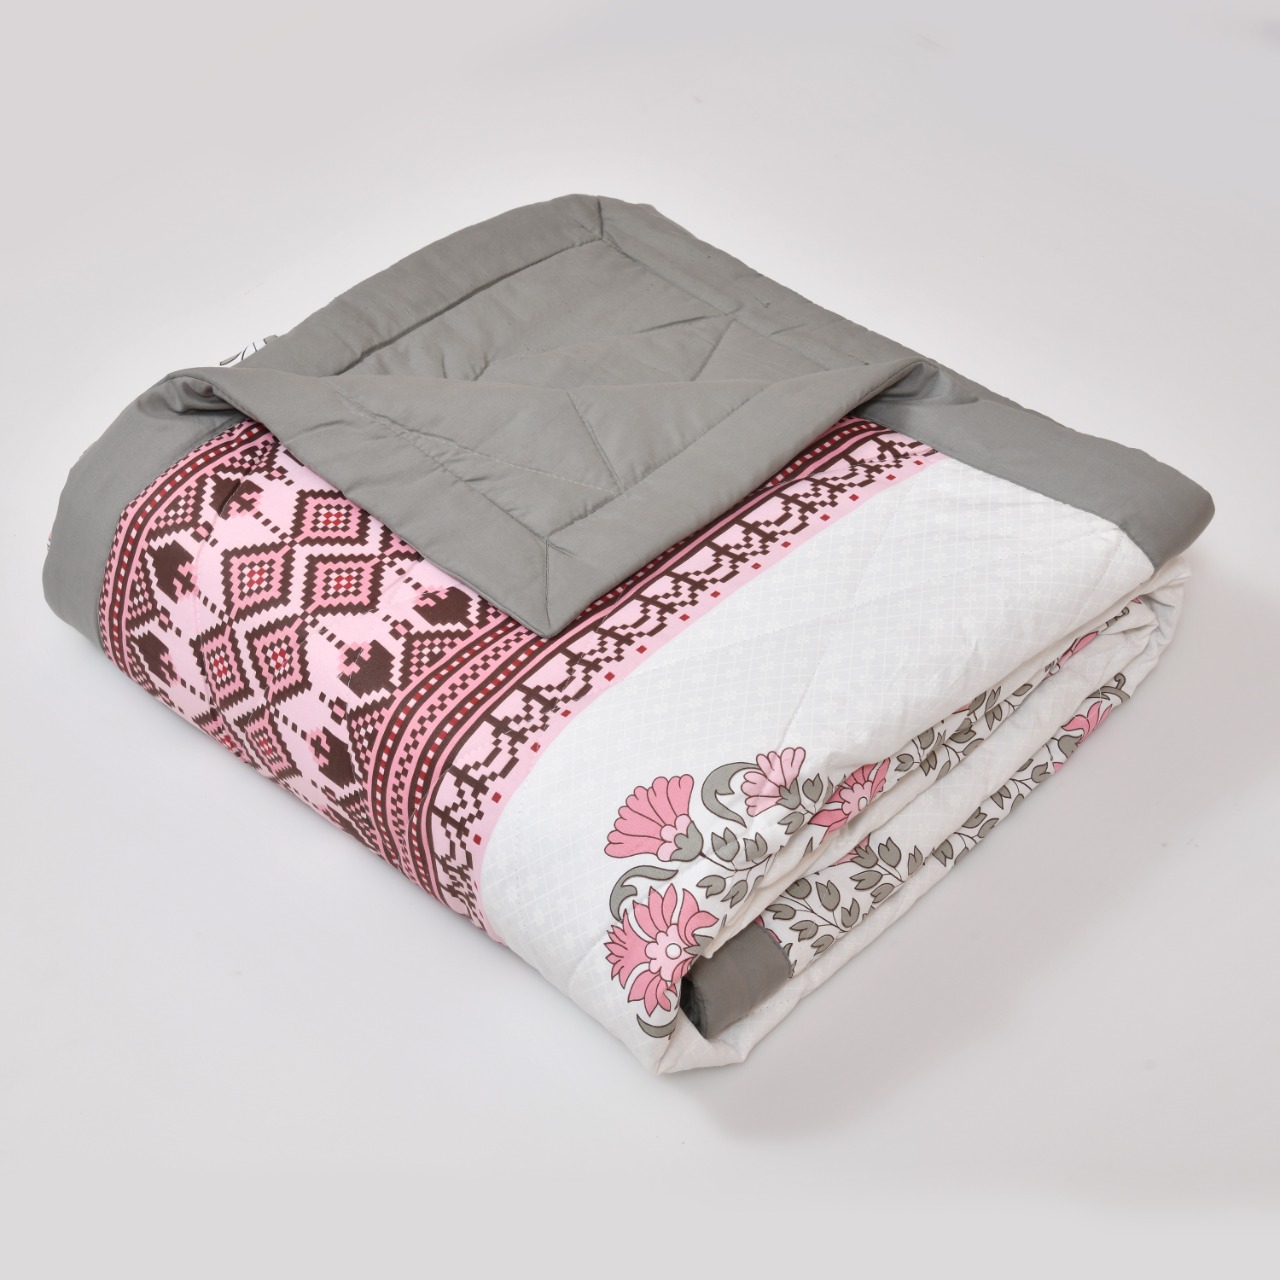 Floral Print Pink Cotton Quilted Bedcover Comforter Blanket